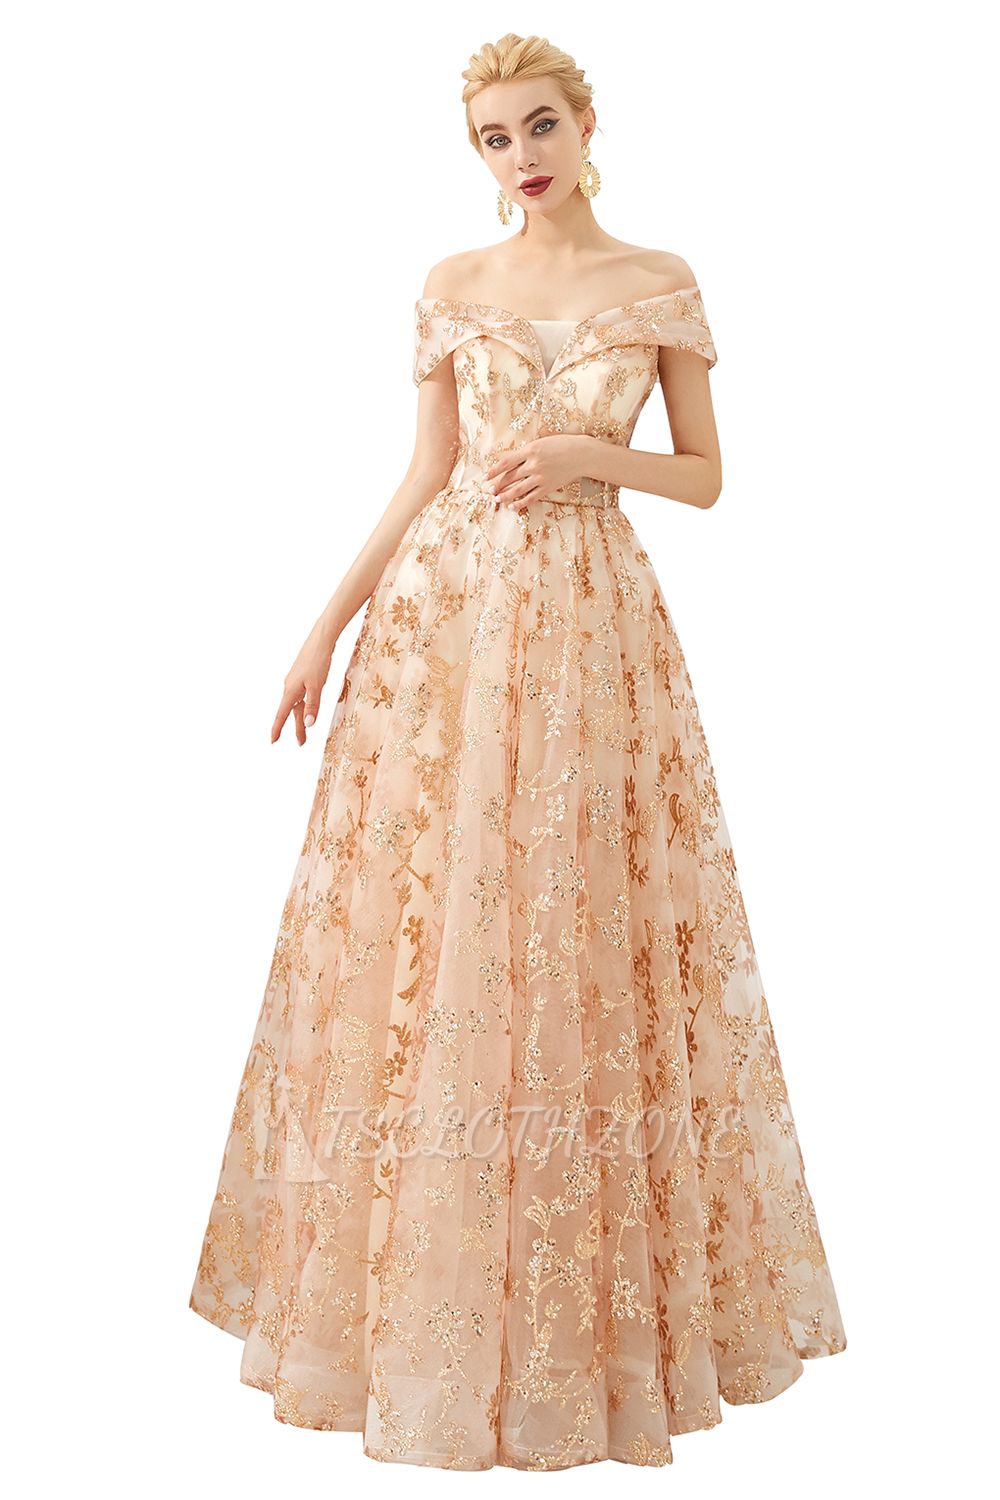 Hale | Romantic Off-the-shoudler Rose Gold Lace-up Tulle Prom Dress with Sparkly Appliques